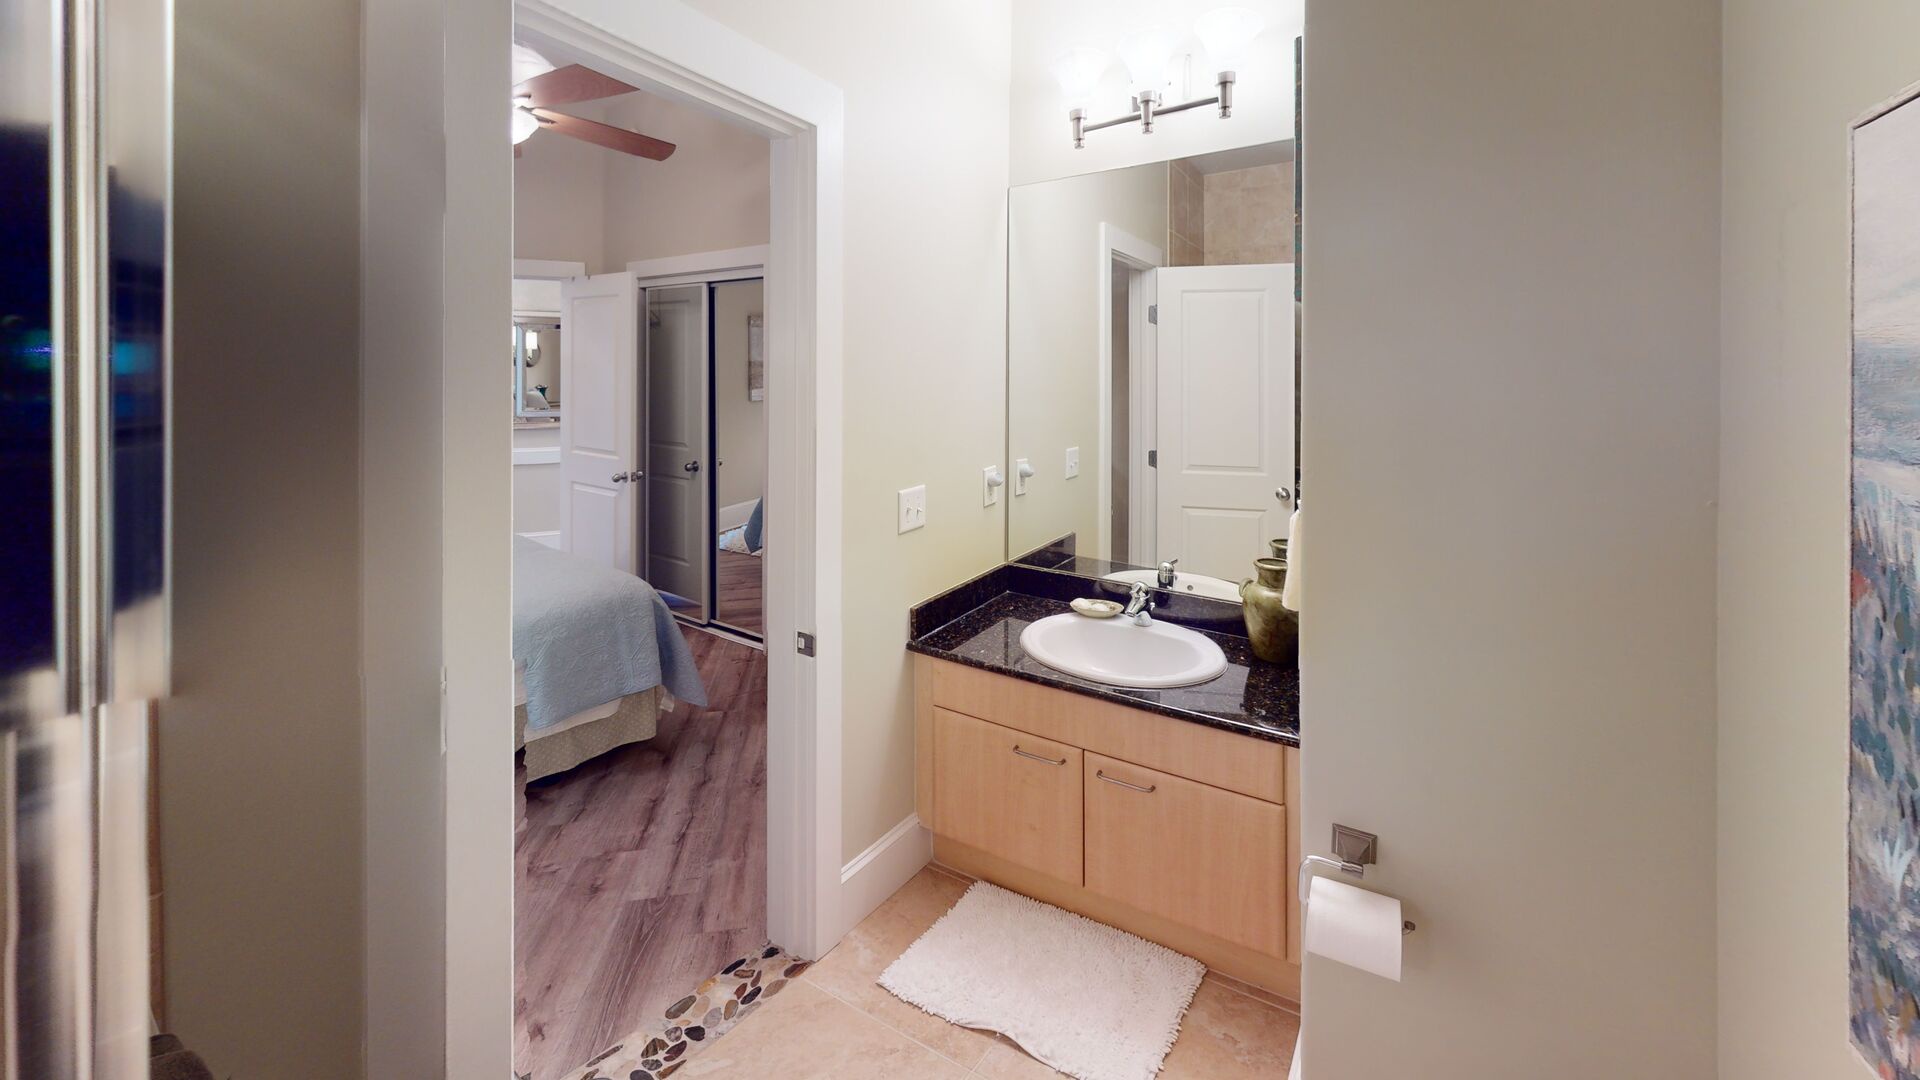 Bedroom 3 has a private bathroom with a walk-in shower